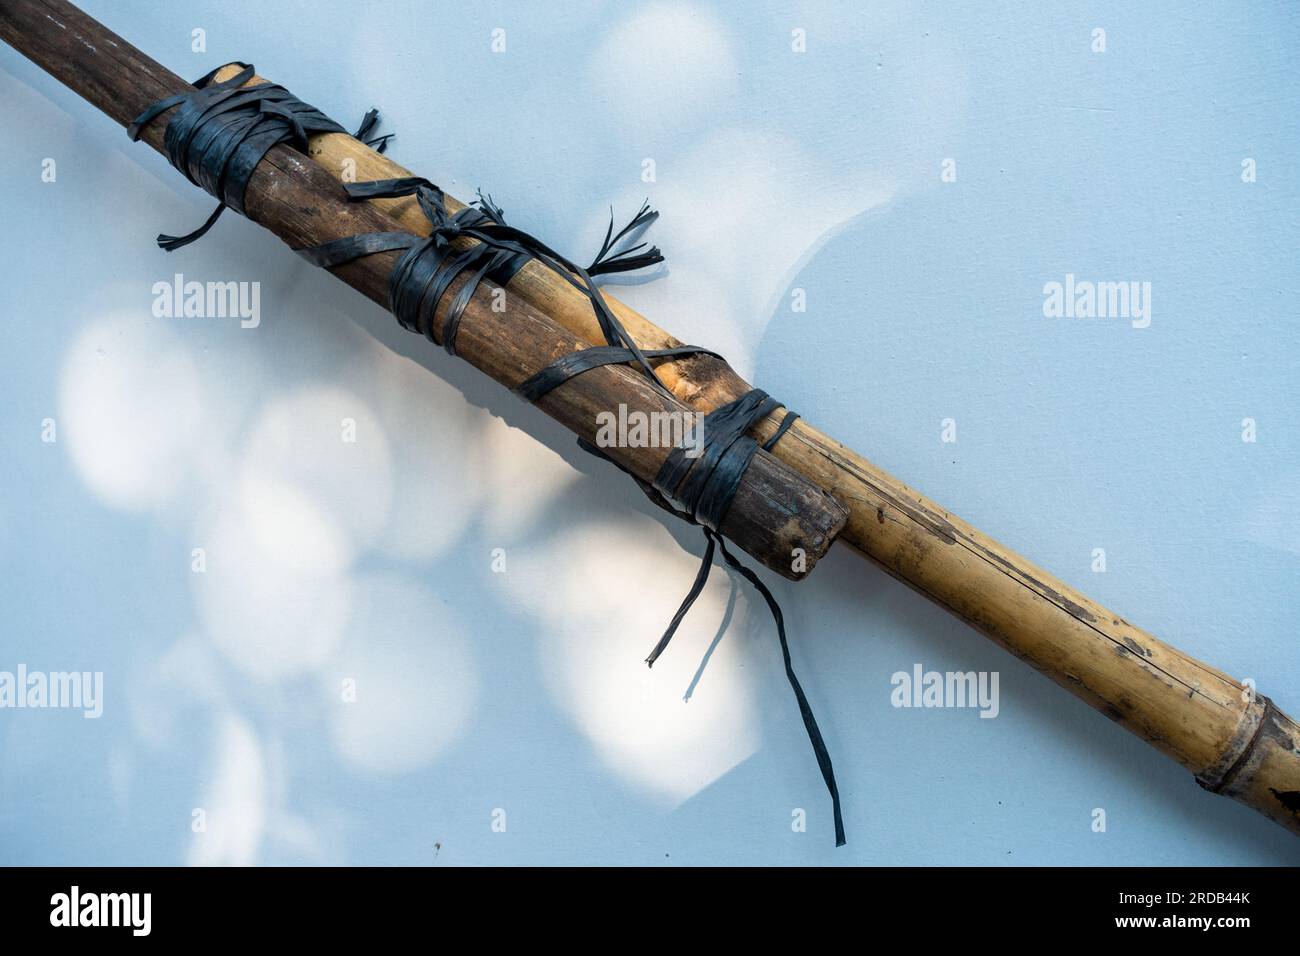 Two big bamboo poles tied up together with a nylon rope. India Stock Photo